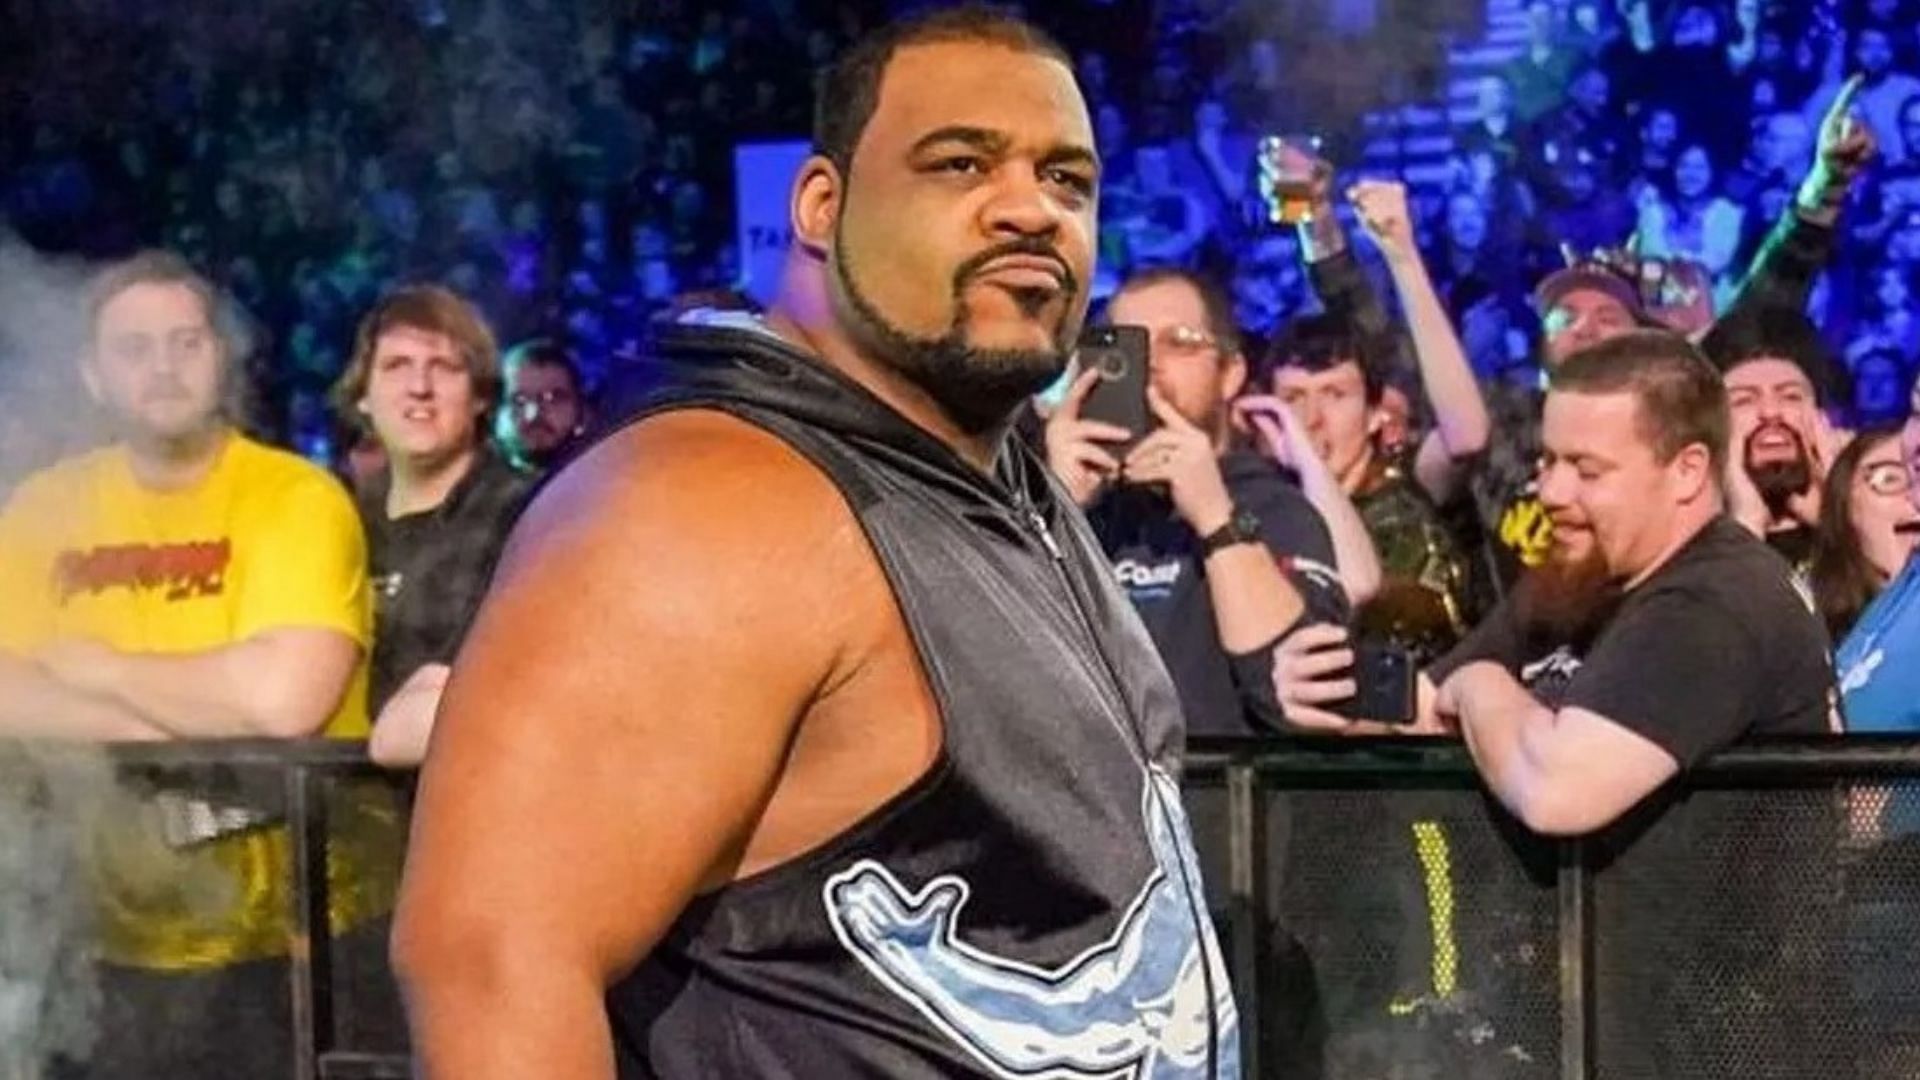 Keith Lee is a former WWE superstar who is now with AEW